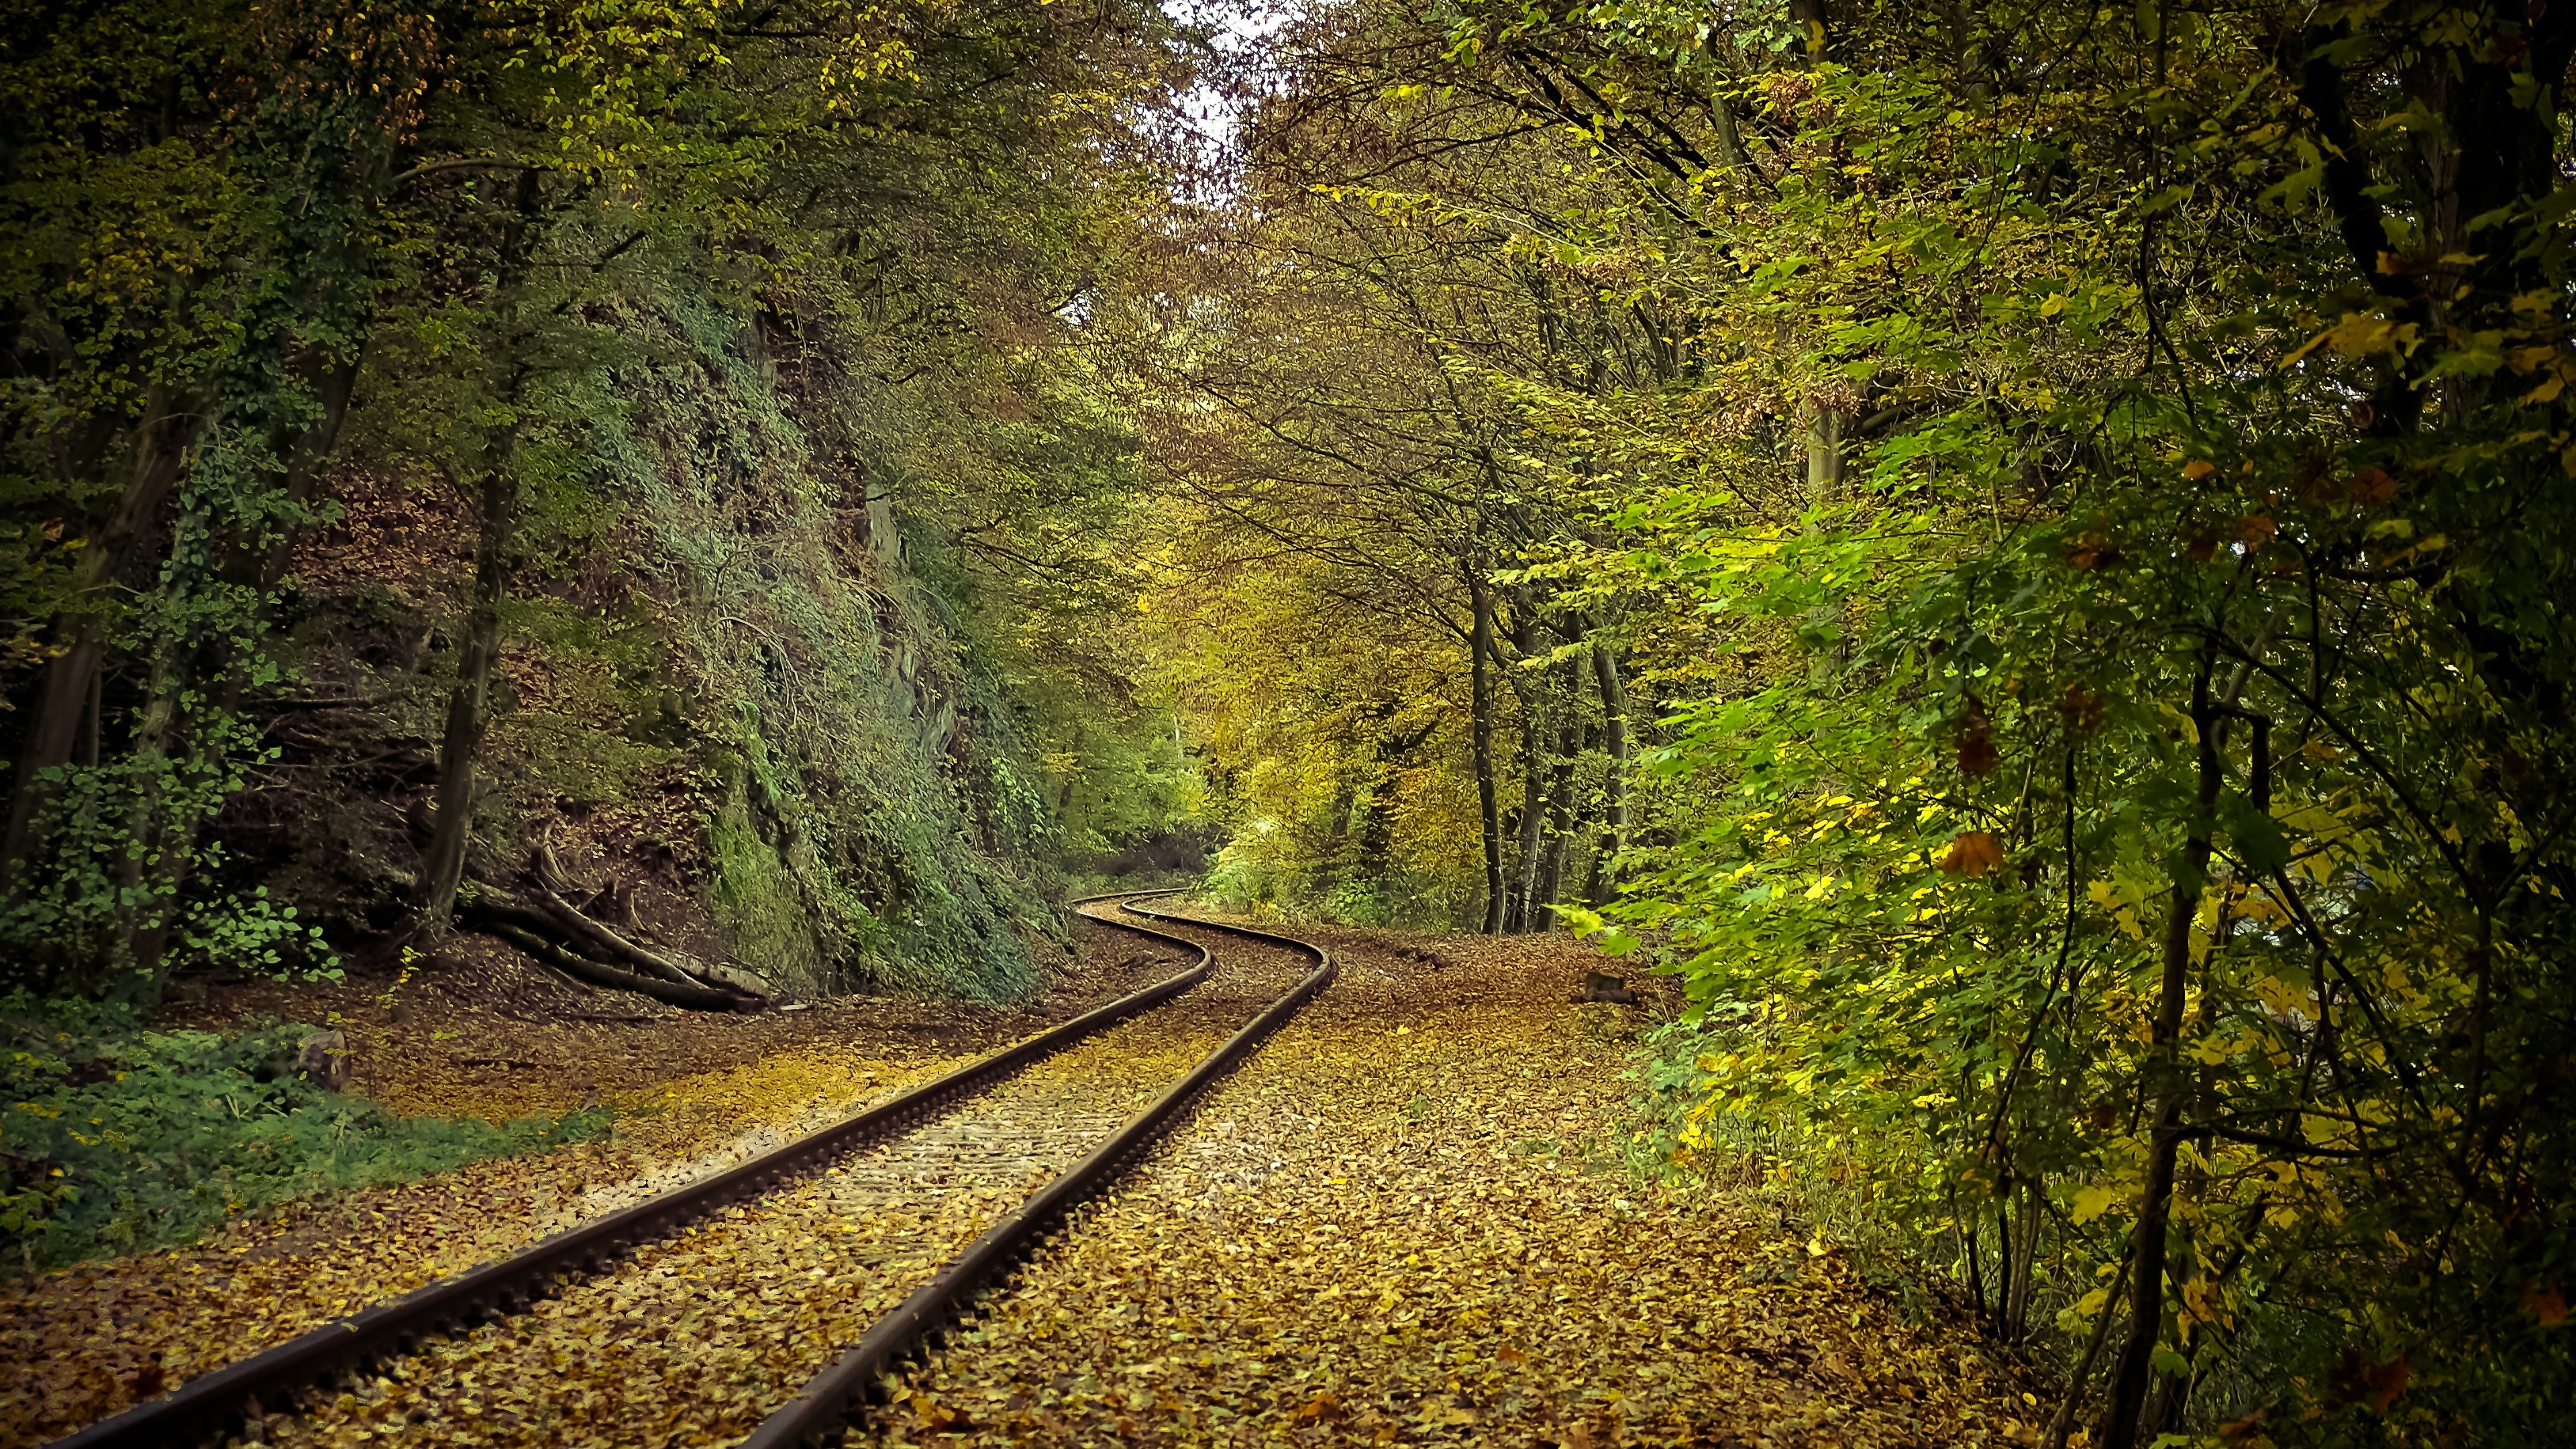 3840x2160, Forest Train Track Wallpaper - Forest With Train Tracks - HD Wallpaper 